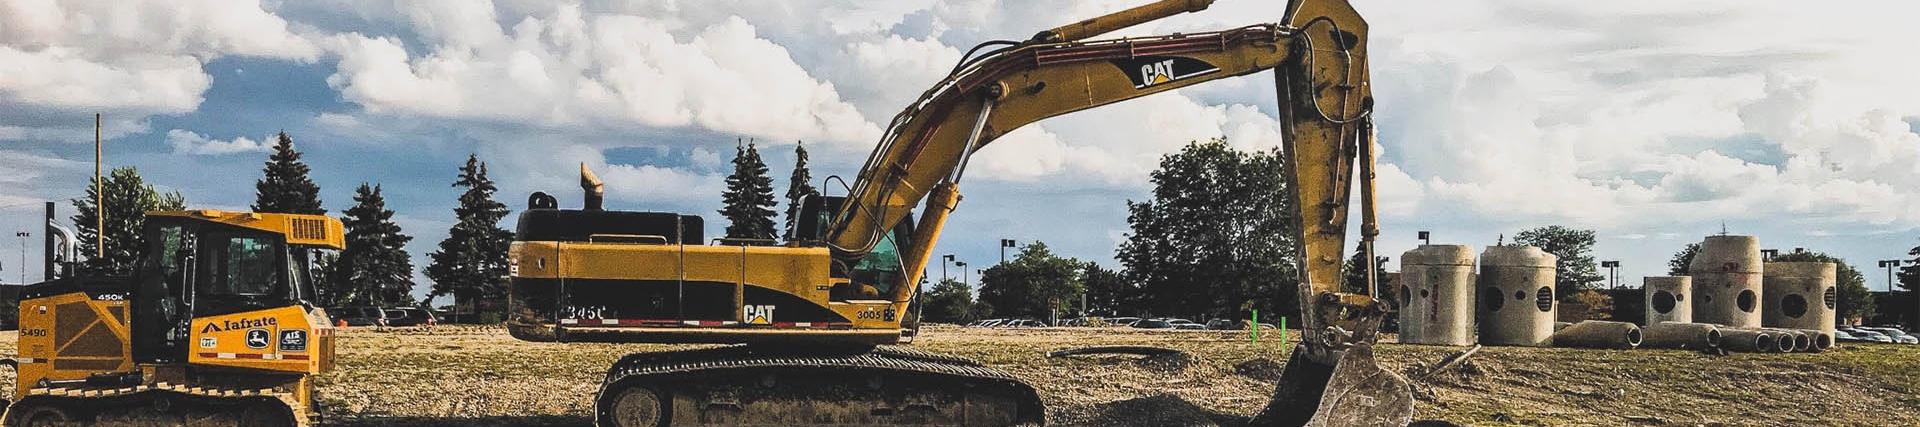 A Caterpillar excavator on a road-side building site